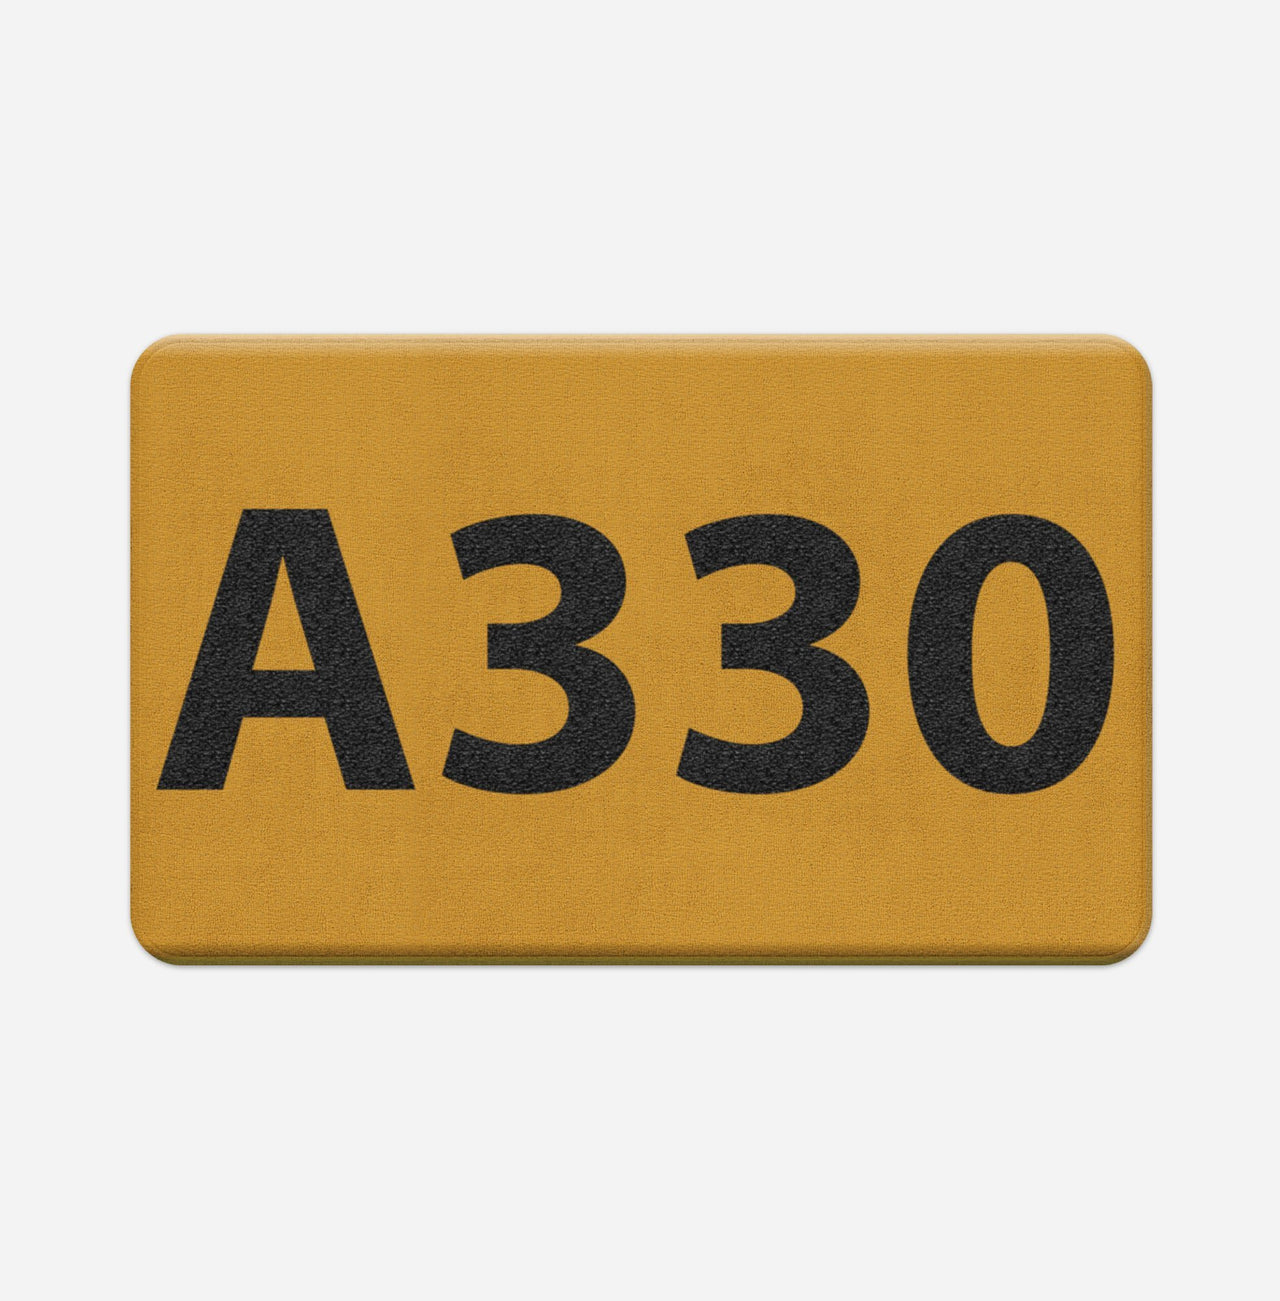 Airport Ground Signs Designed "Airbus A330" Bath Mats Pilot Eyes Store 